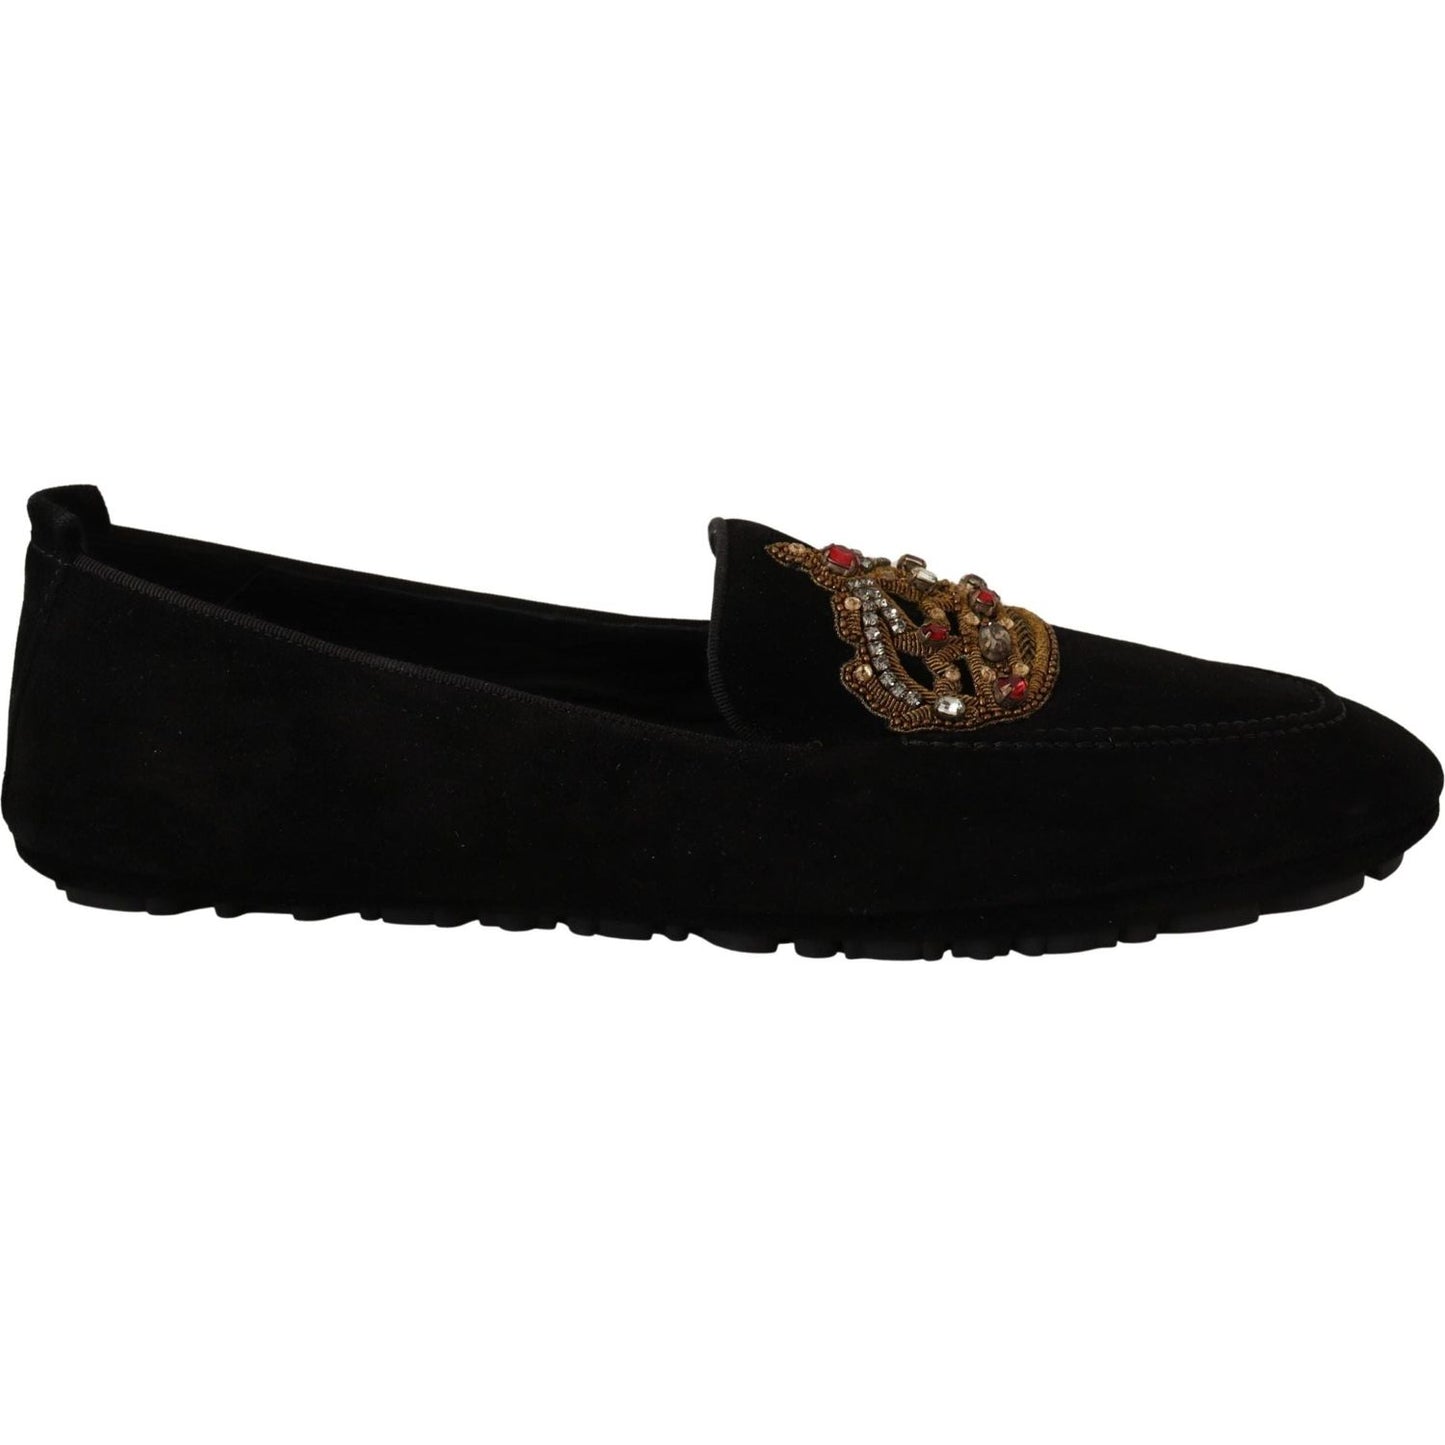 Dolce & Gabbana Elegant Black Leather Loafer Slides with Gold Embroidery black-leather-crystal-gold-crown-loafers-shoes IMG_5288-scaled-172a3bf8-059.jpg